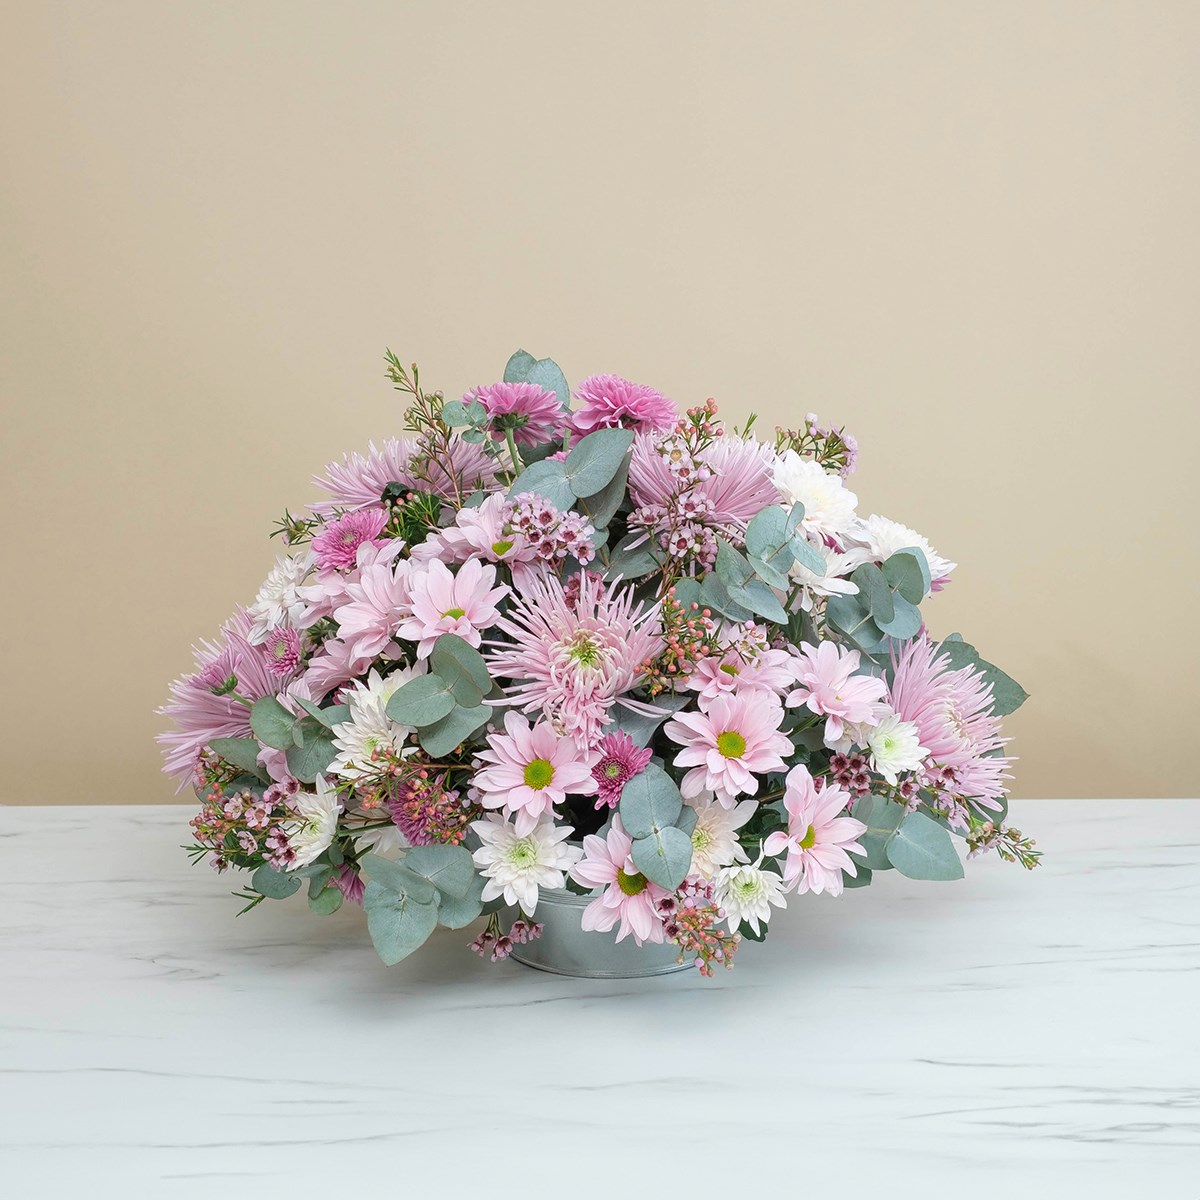 product image for Funeral centrepiece in pink tones